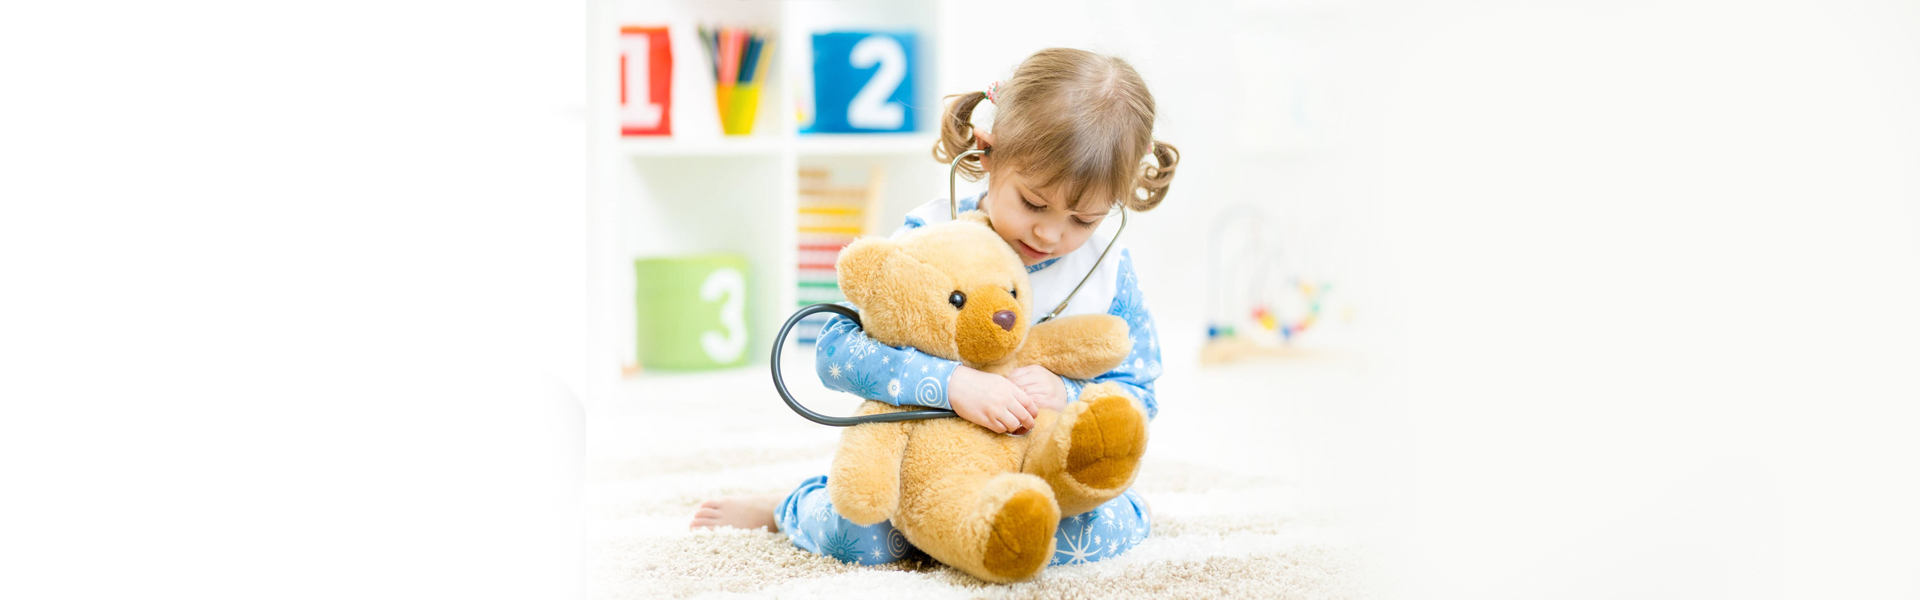 Essential Facts You Need to Know About Urgent, Emergency, and Regular Pediatric Care